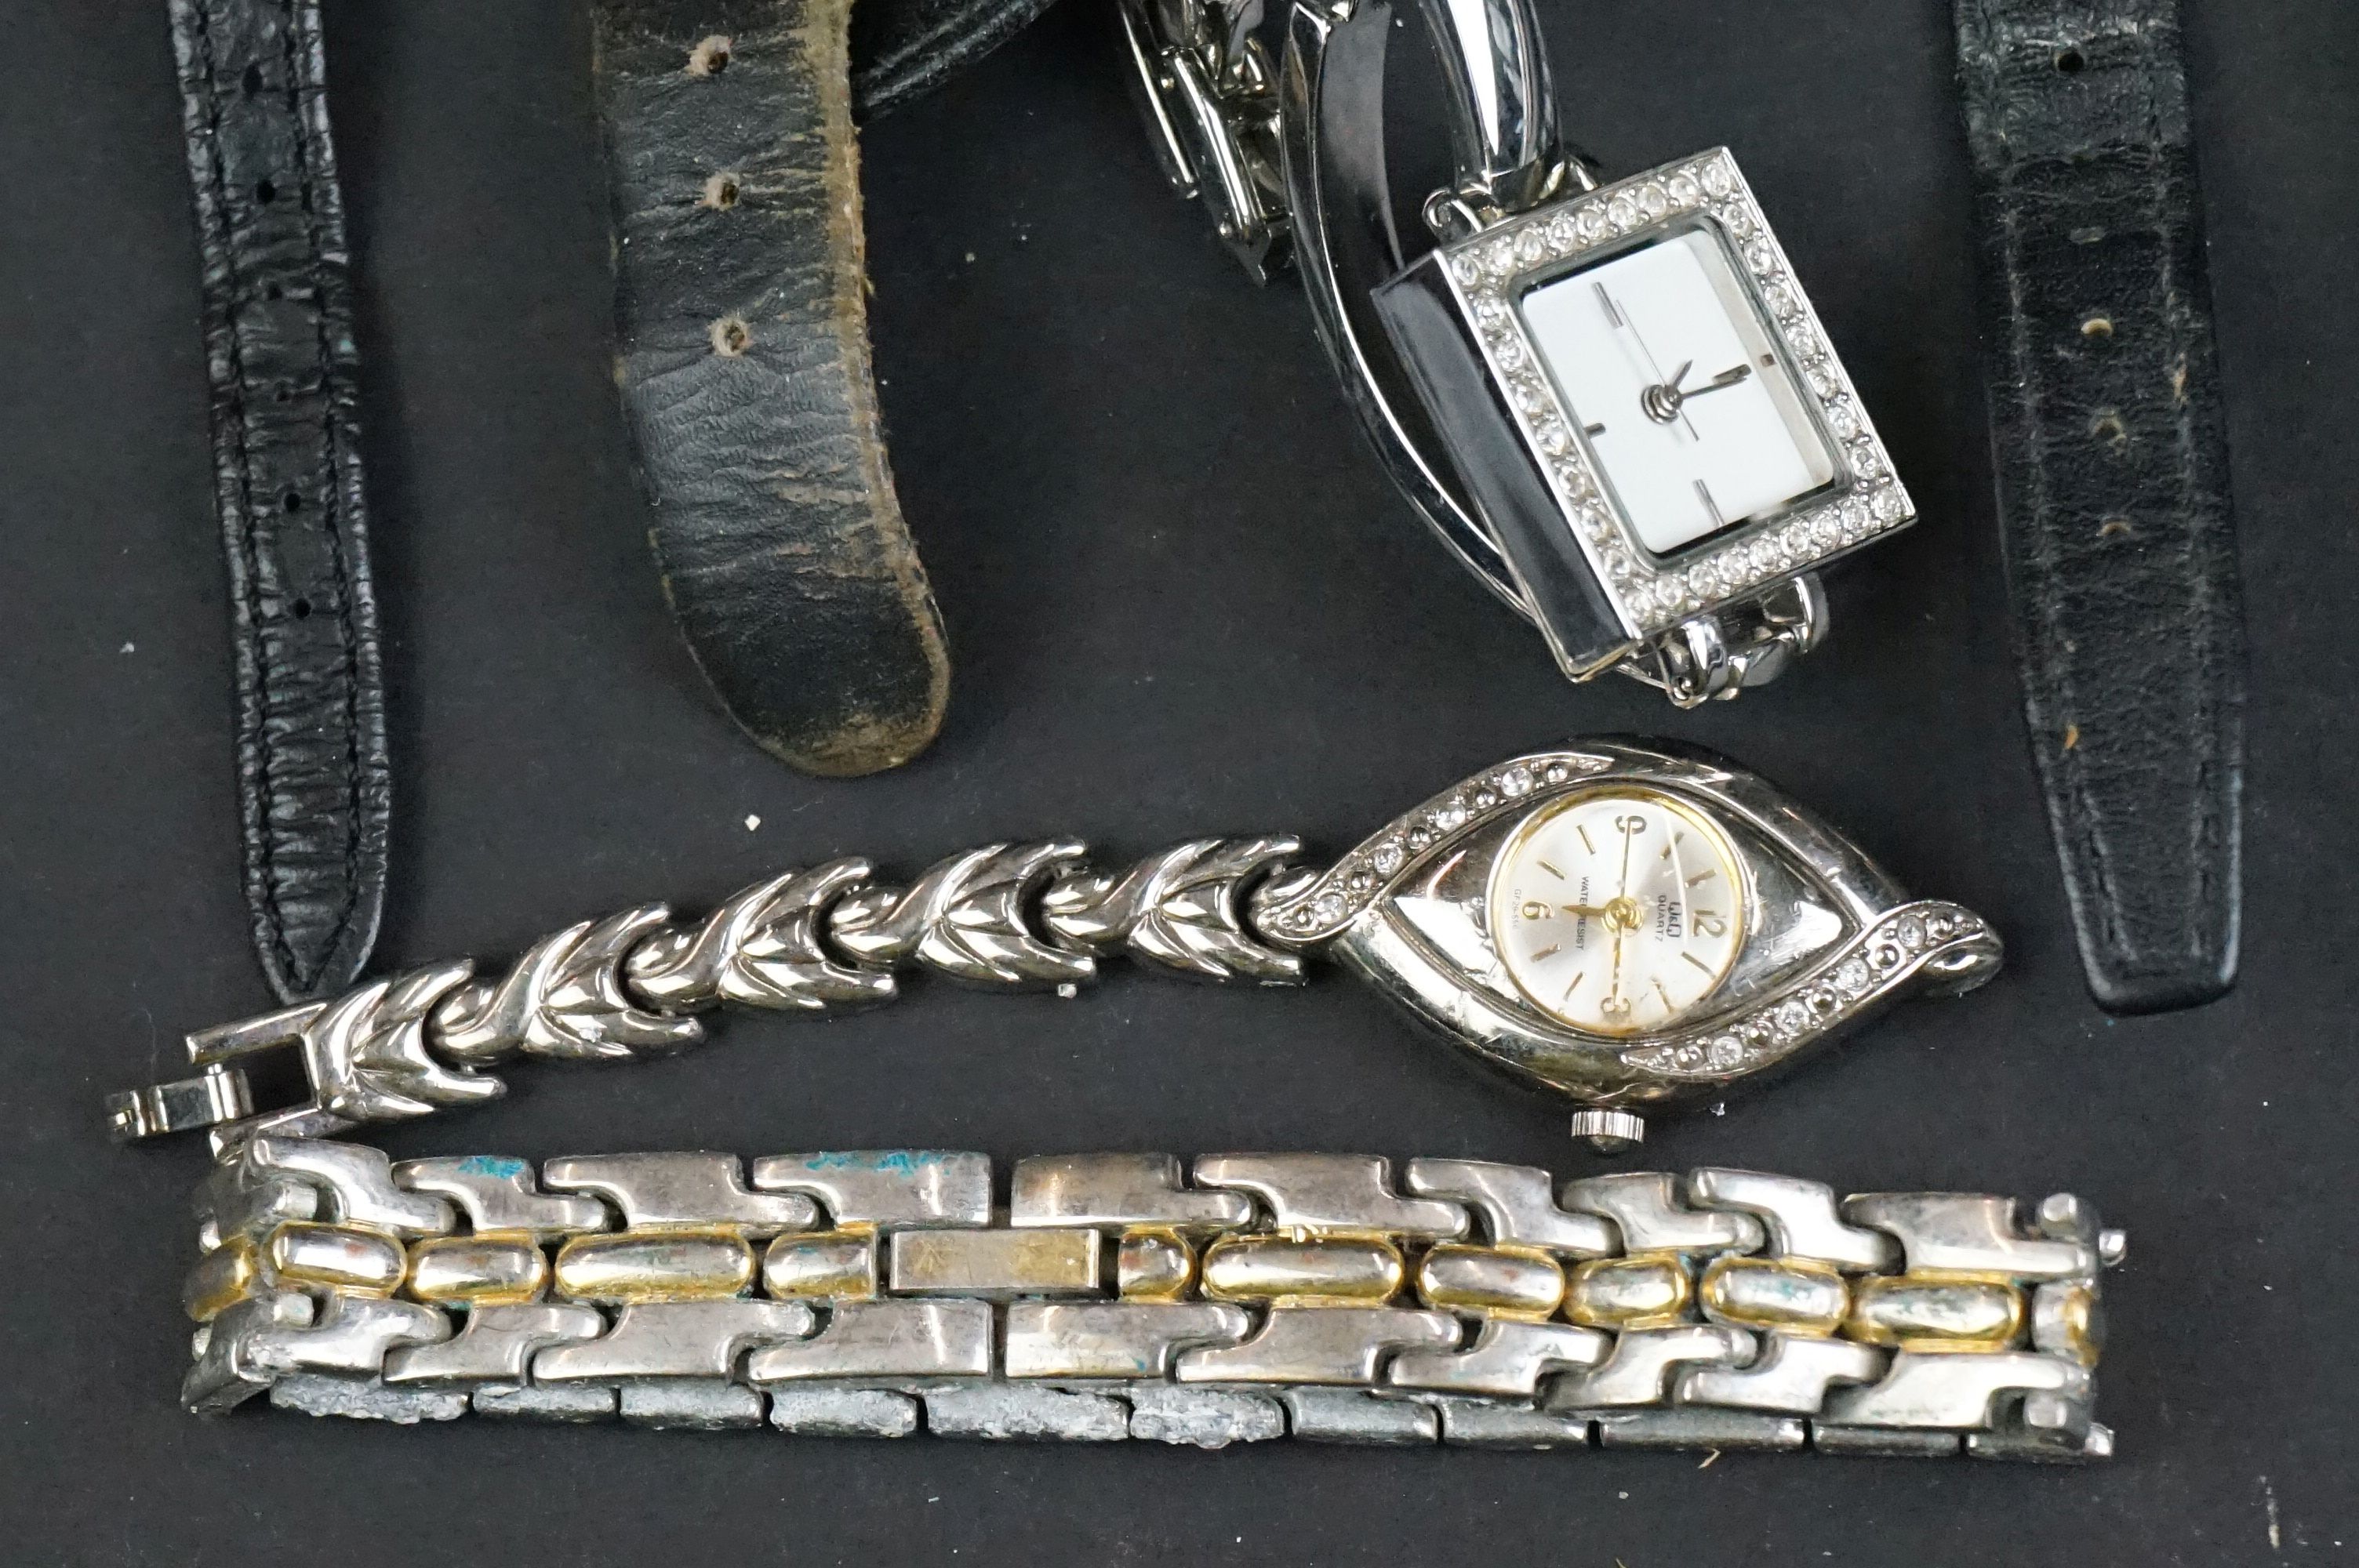 Collection of approximately Nineteen Wristwatches including Sekonda, Gucci and Accurist - Image 9 of 13